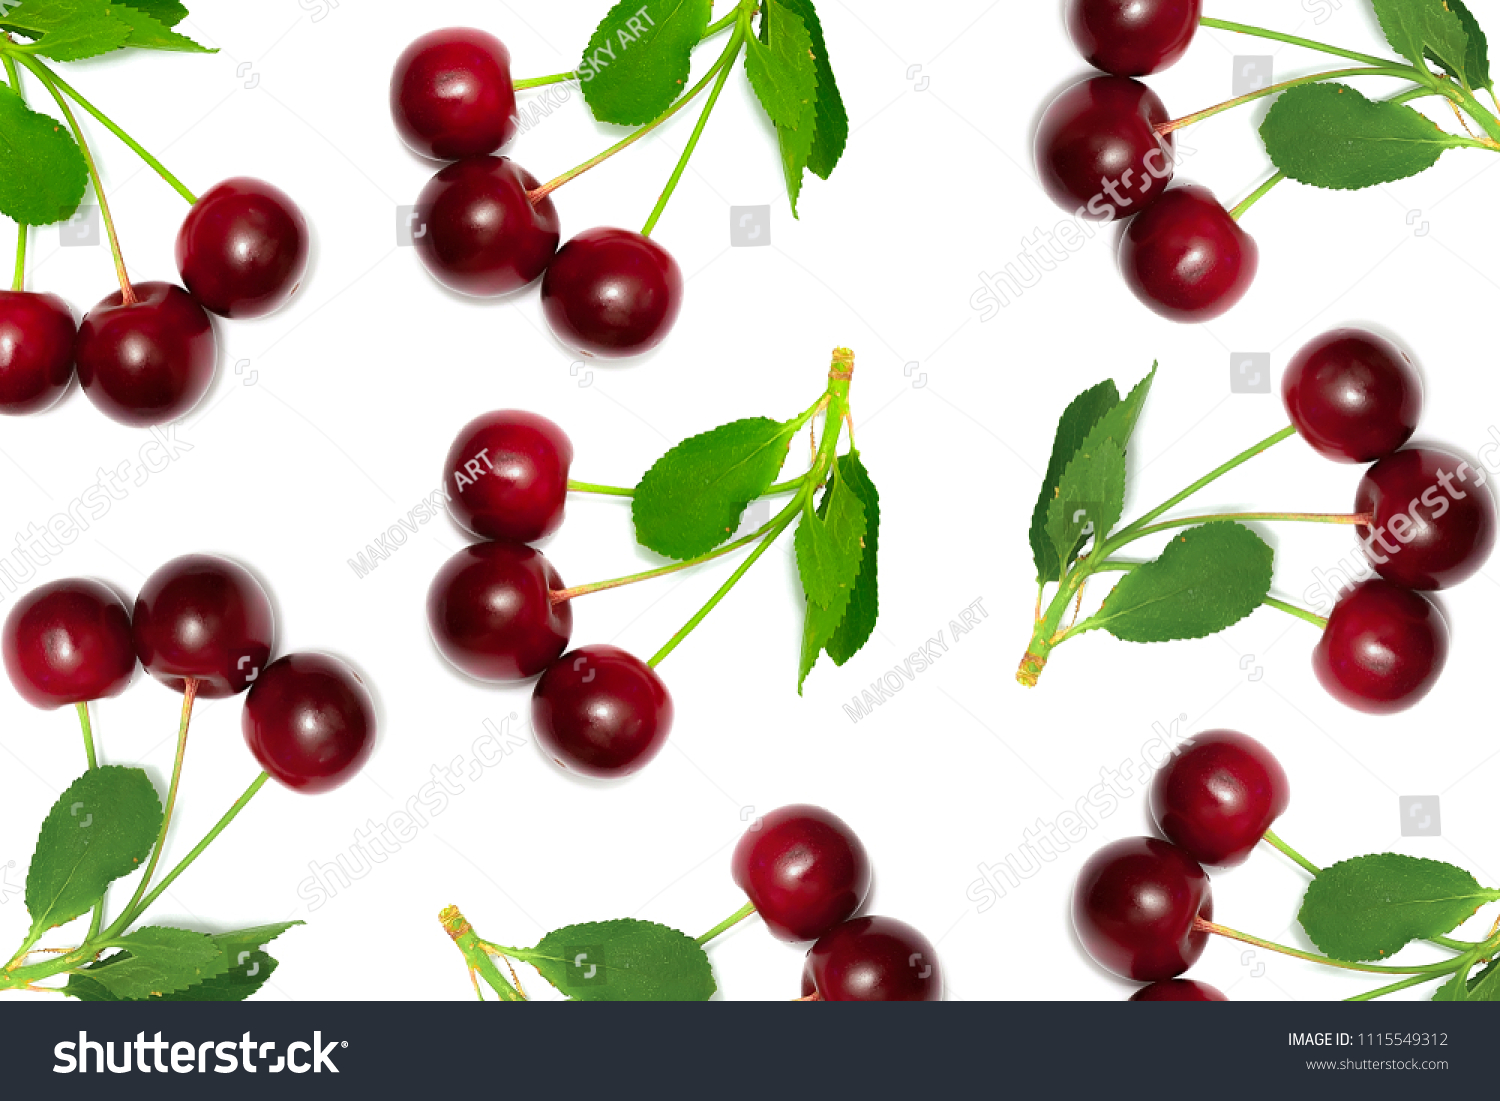 Many cherries on a white background #1115549312